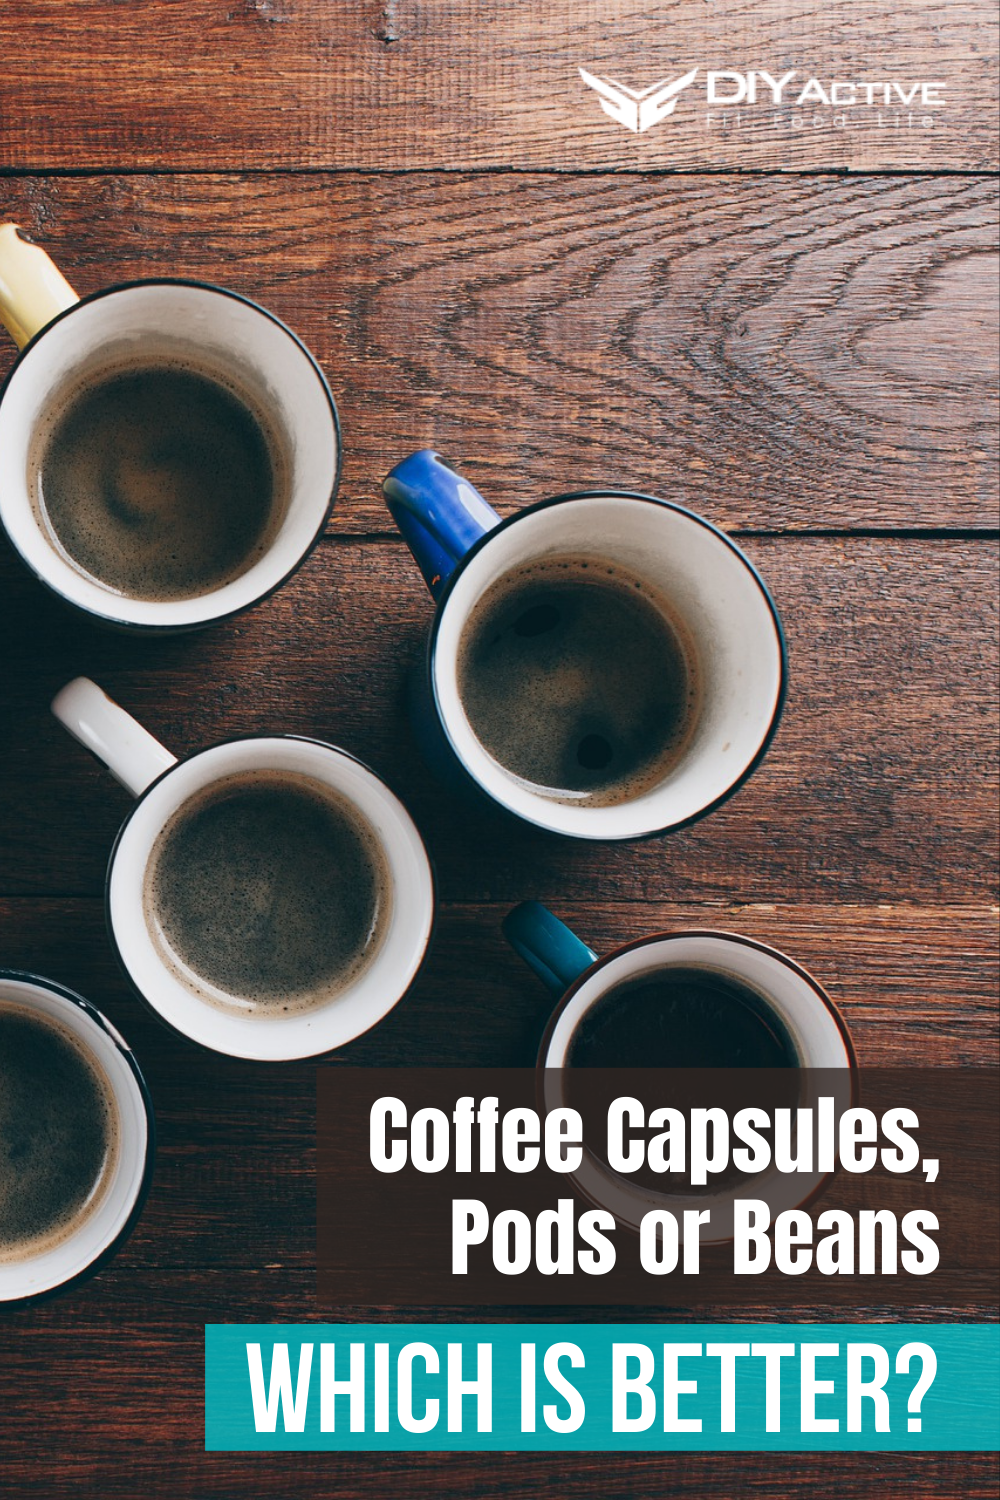 Coffee Capsules, Pods or Beans – Which is Better?